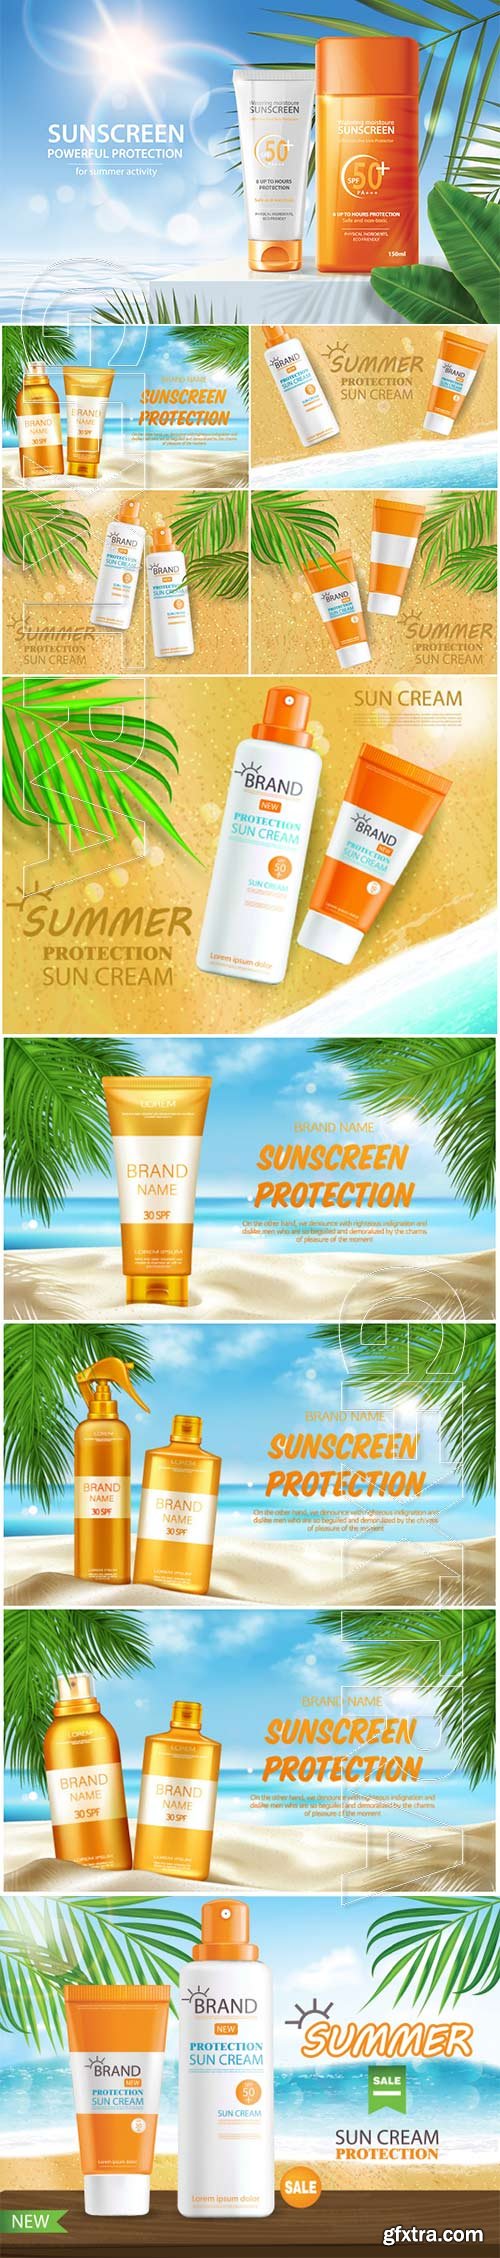 Sunscreen protection cosmetic, mock up banner vector illustration